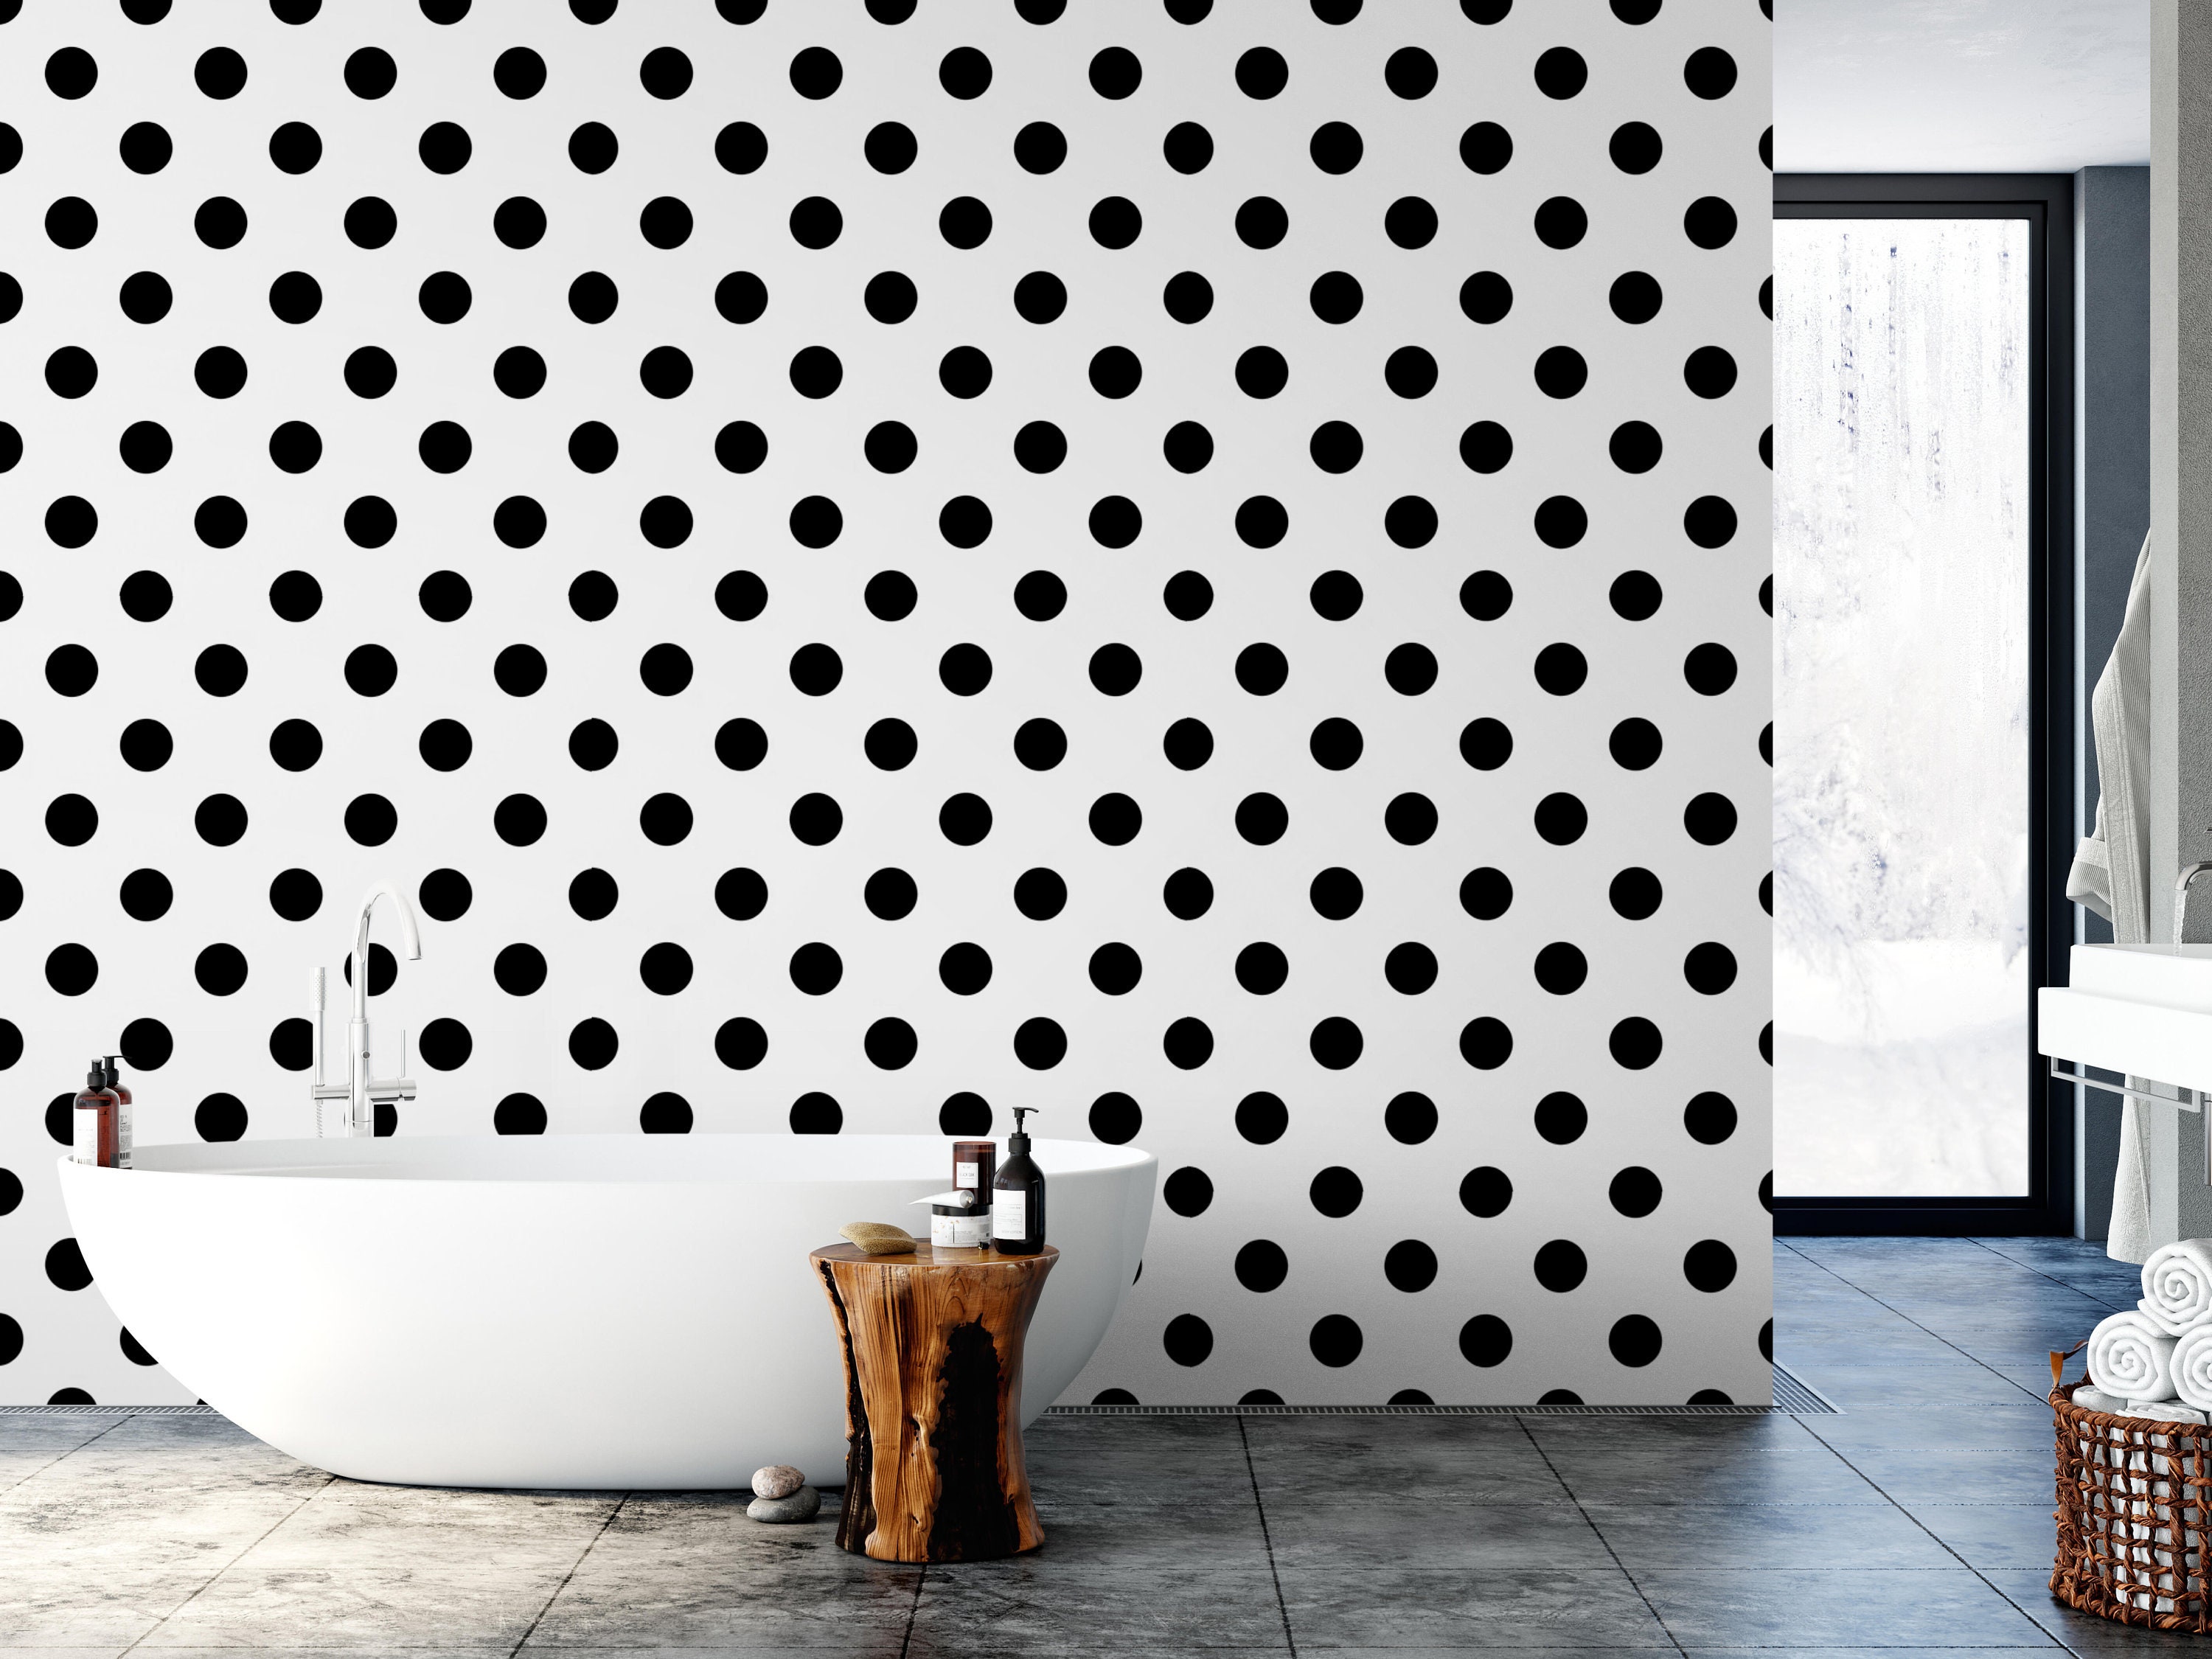 Polka Dot Wallpaper Vector Art Icons and Graphics for Free Download